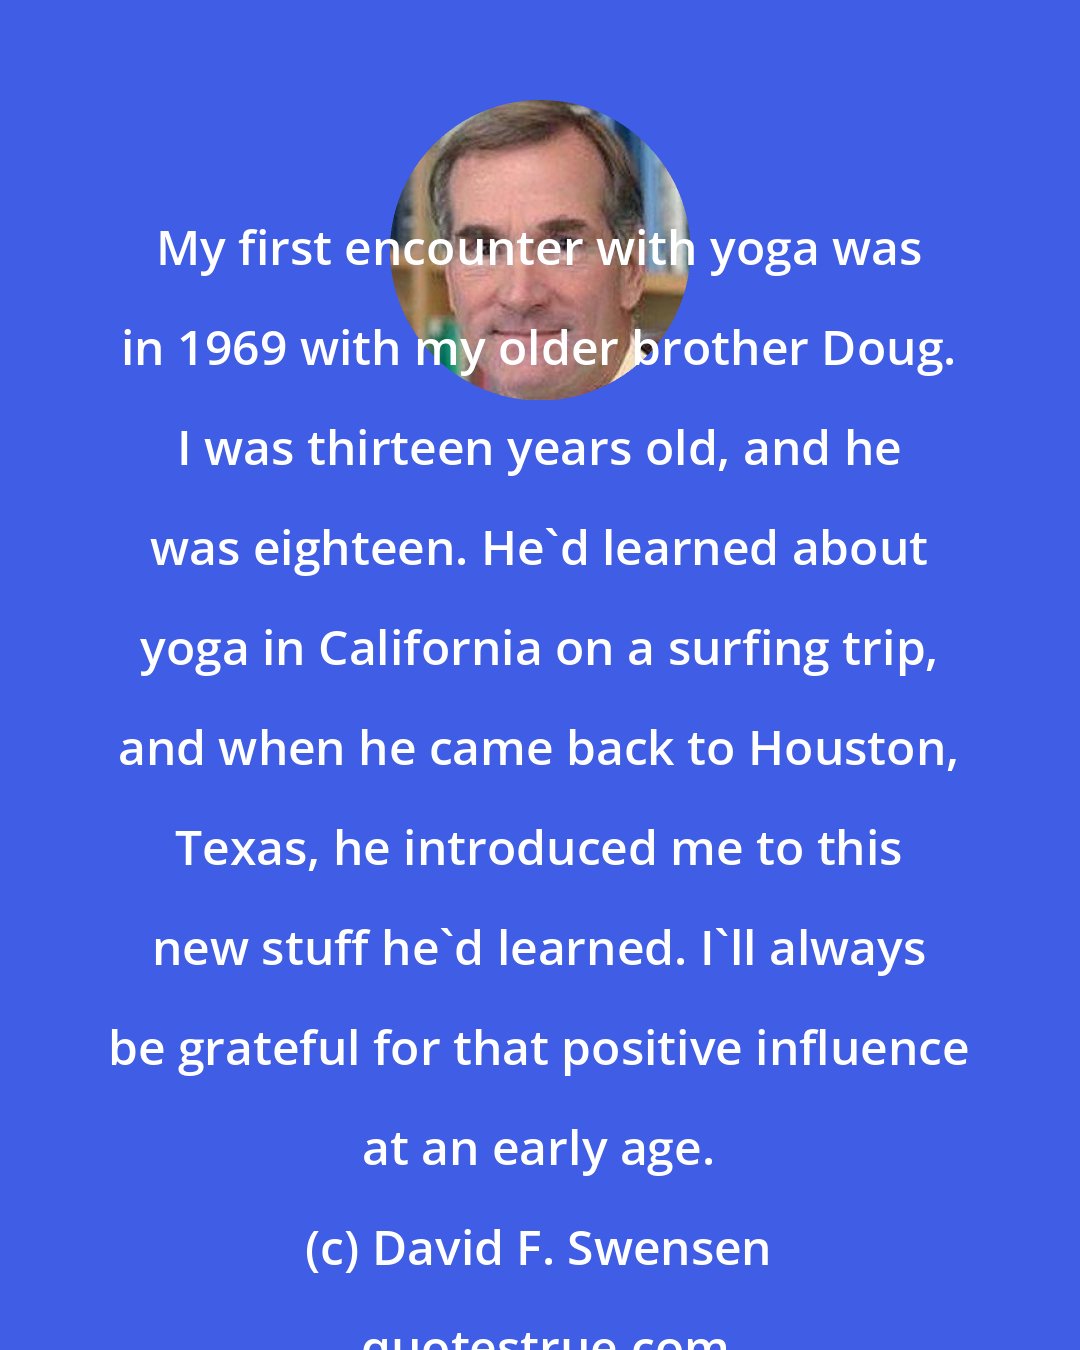 David F. Swensen: My first encounter with yoga was in 1969 with my older brother Doug. I was thirteen years old, and he was eighteen. He'd learned about yoga in California on a surfing trip, and when he came back to Houston, Texas, he introduced me to this new stuff he'd learned. I'll always be grateful for that positive influence at an early age.